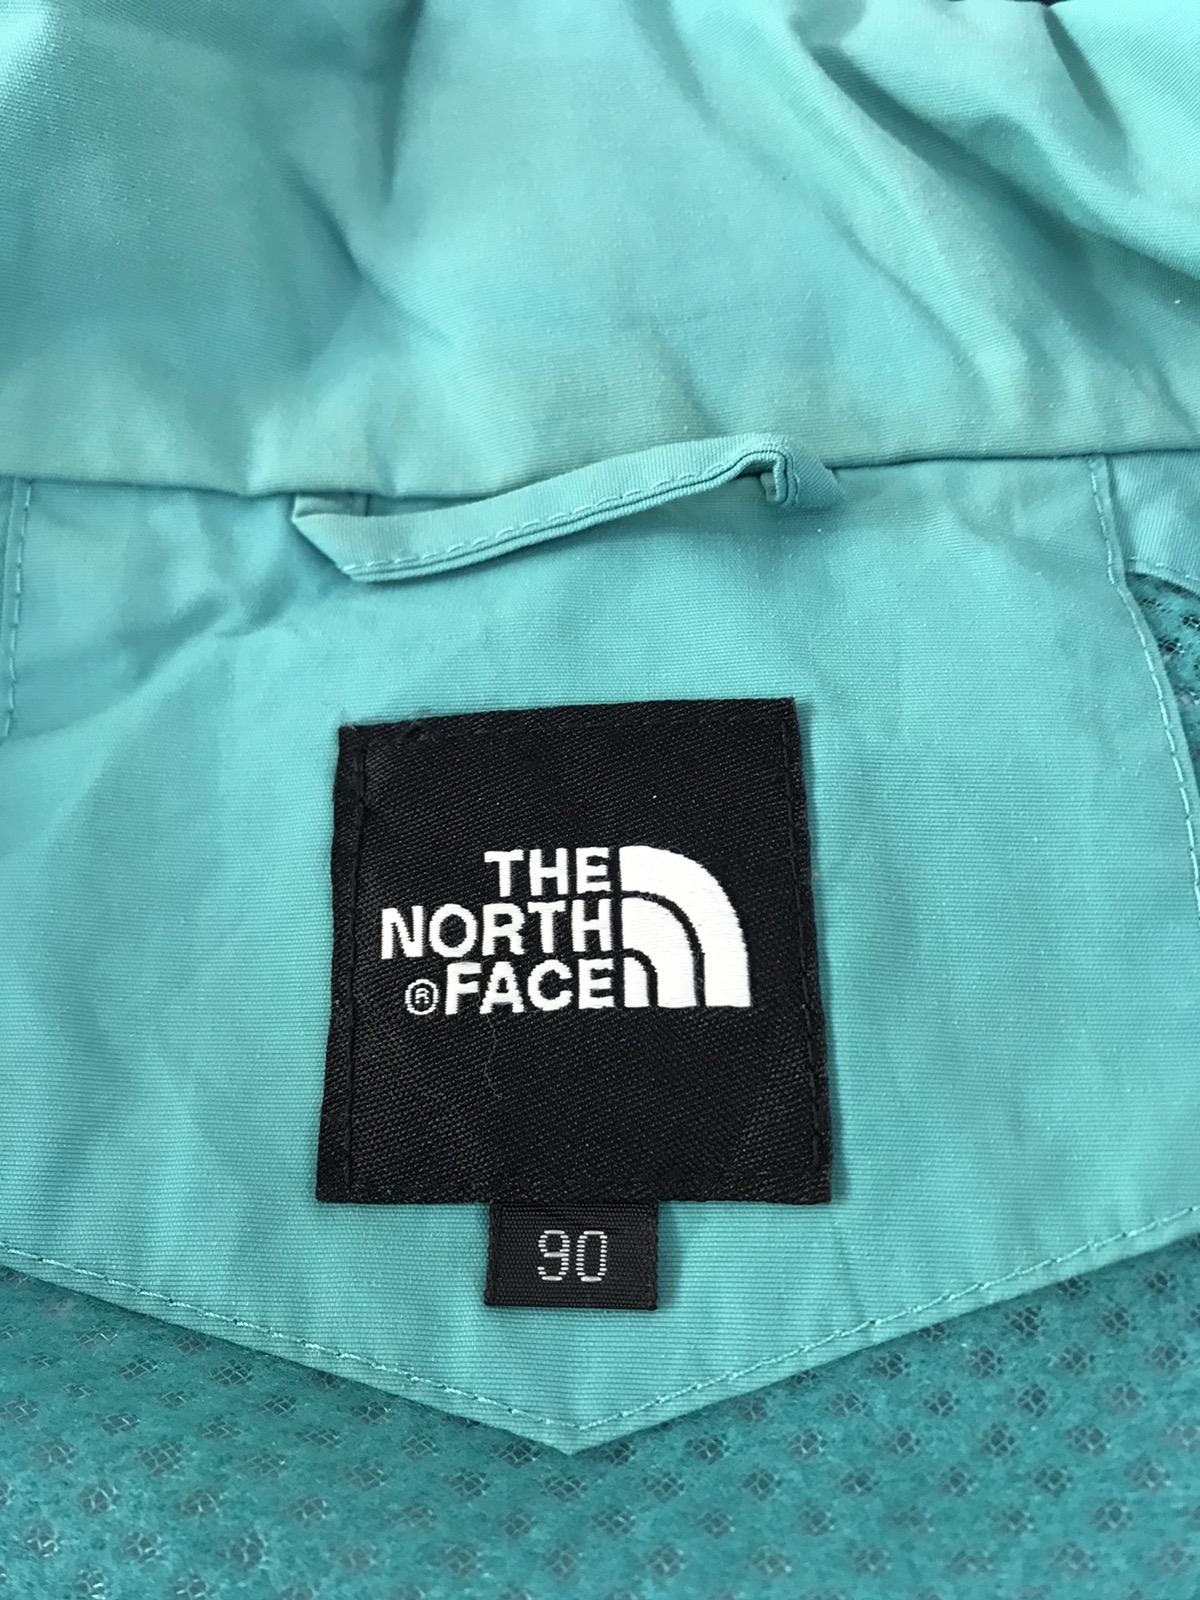 The North Face Quilted Jacket Zipper Style Outdoor Hiking - 8